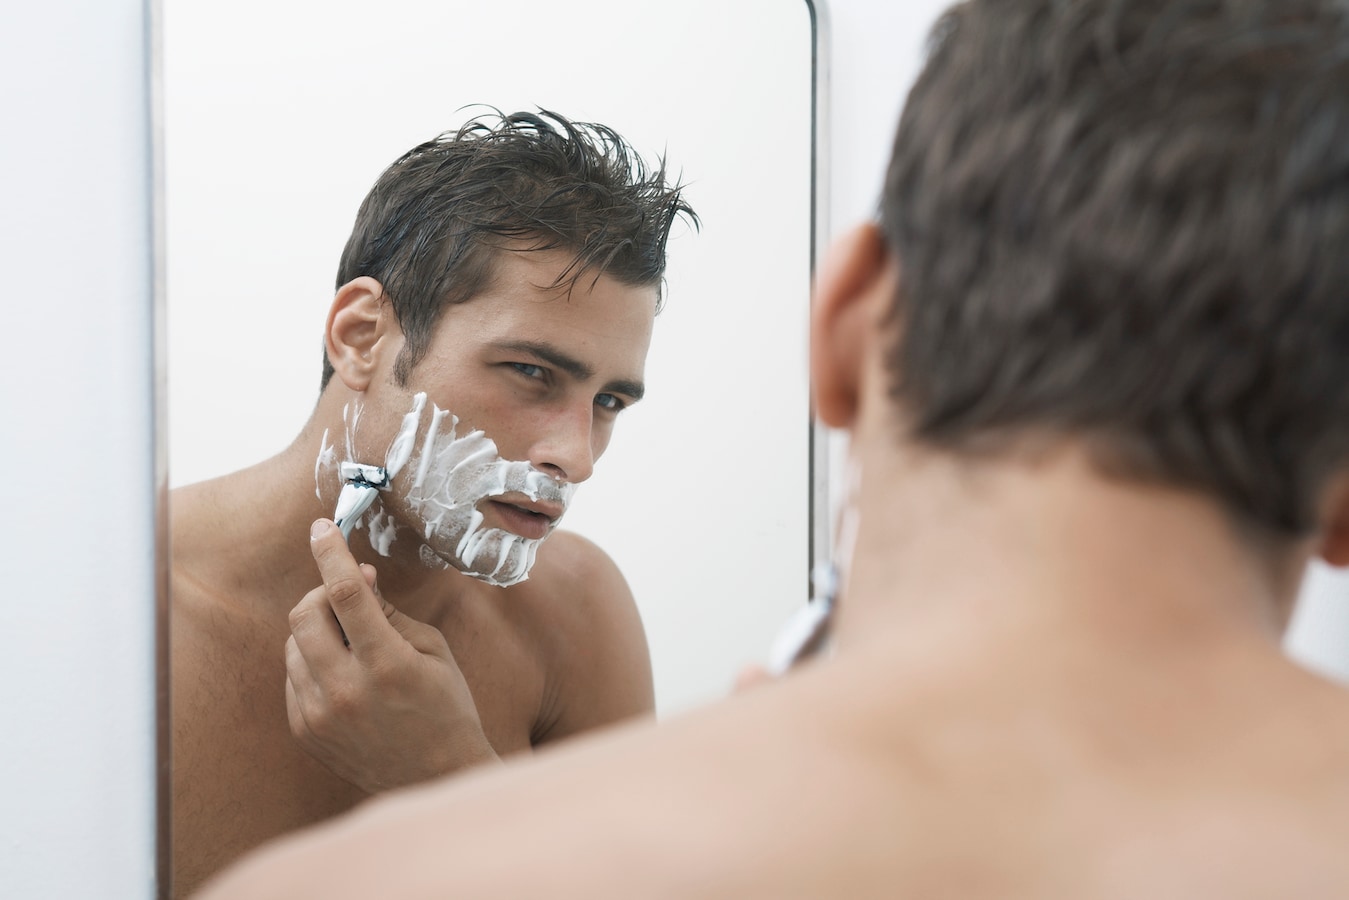 Shaving dick. Shave Nickels кто он. European and American male shaving. A clean shaven man.